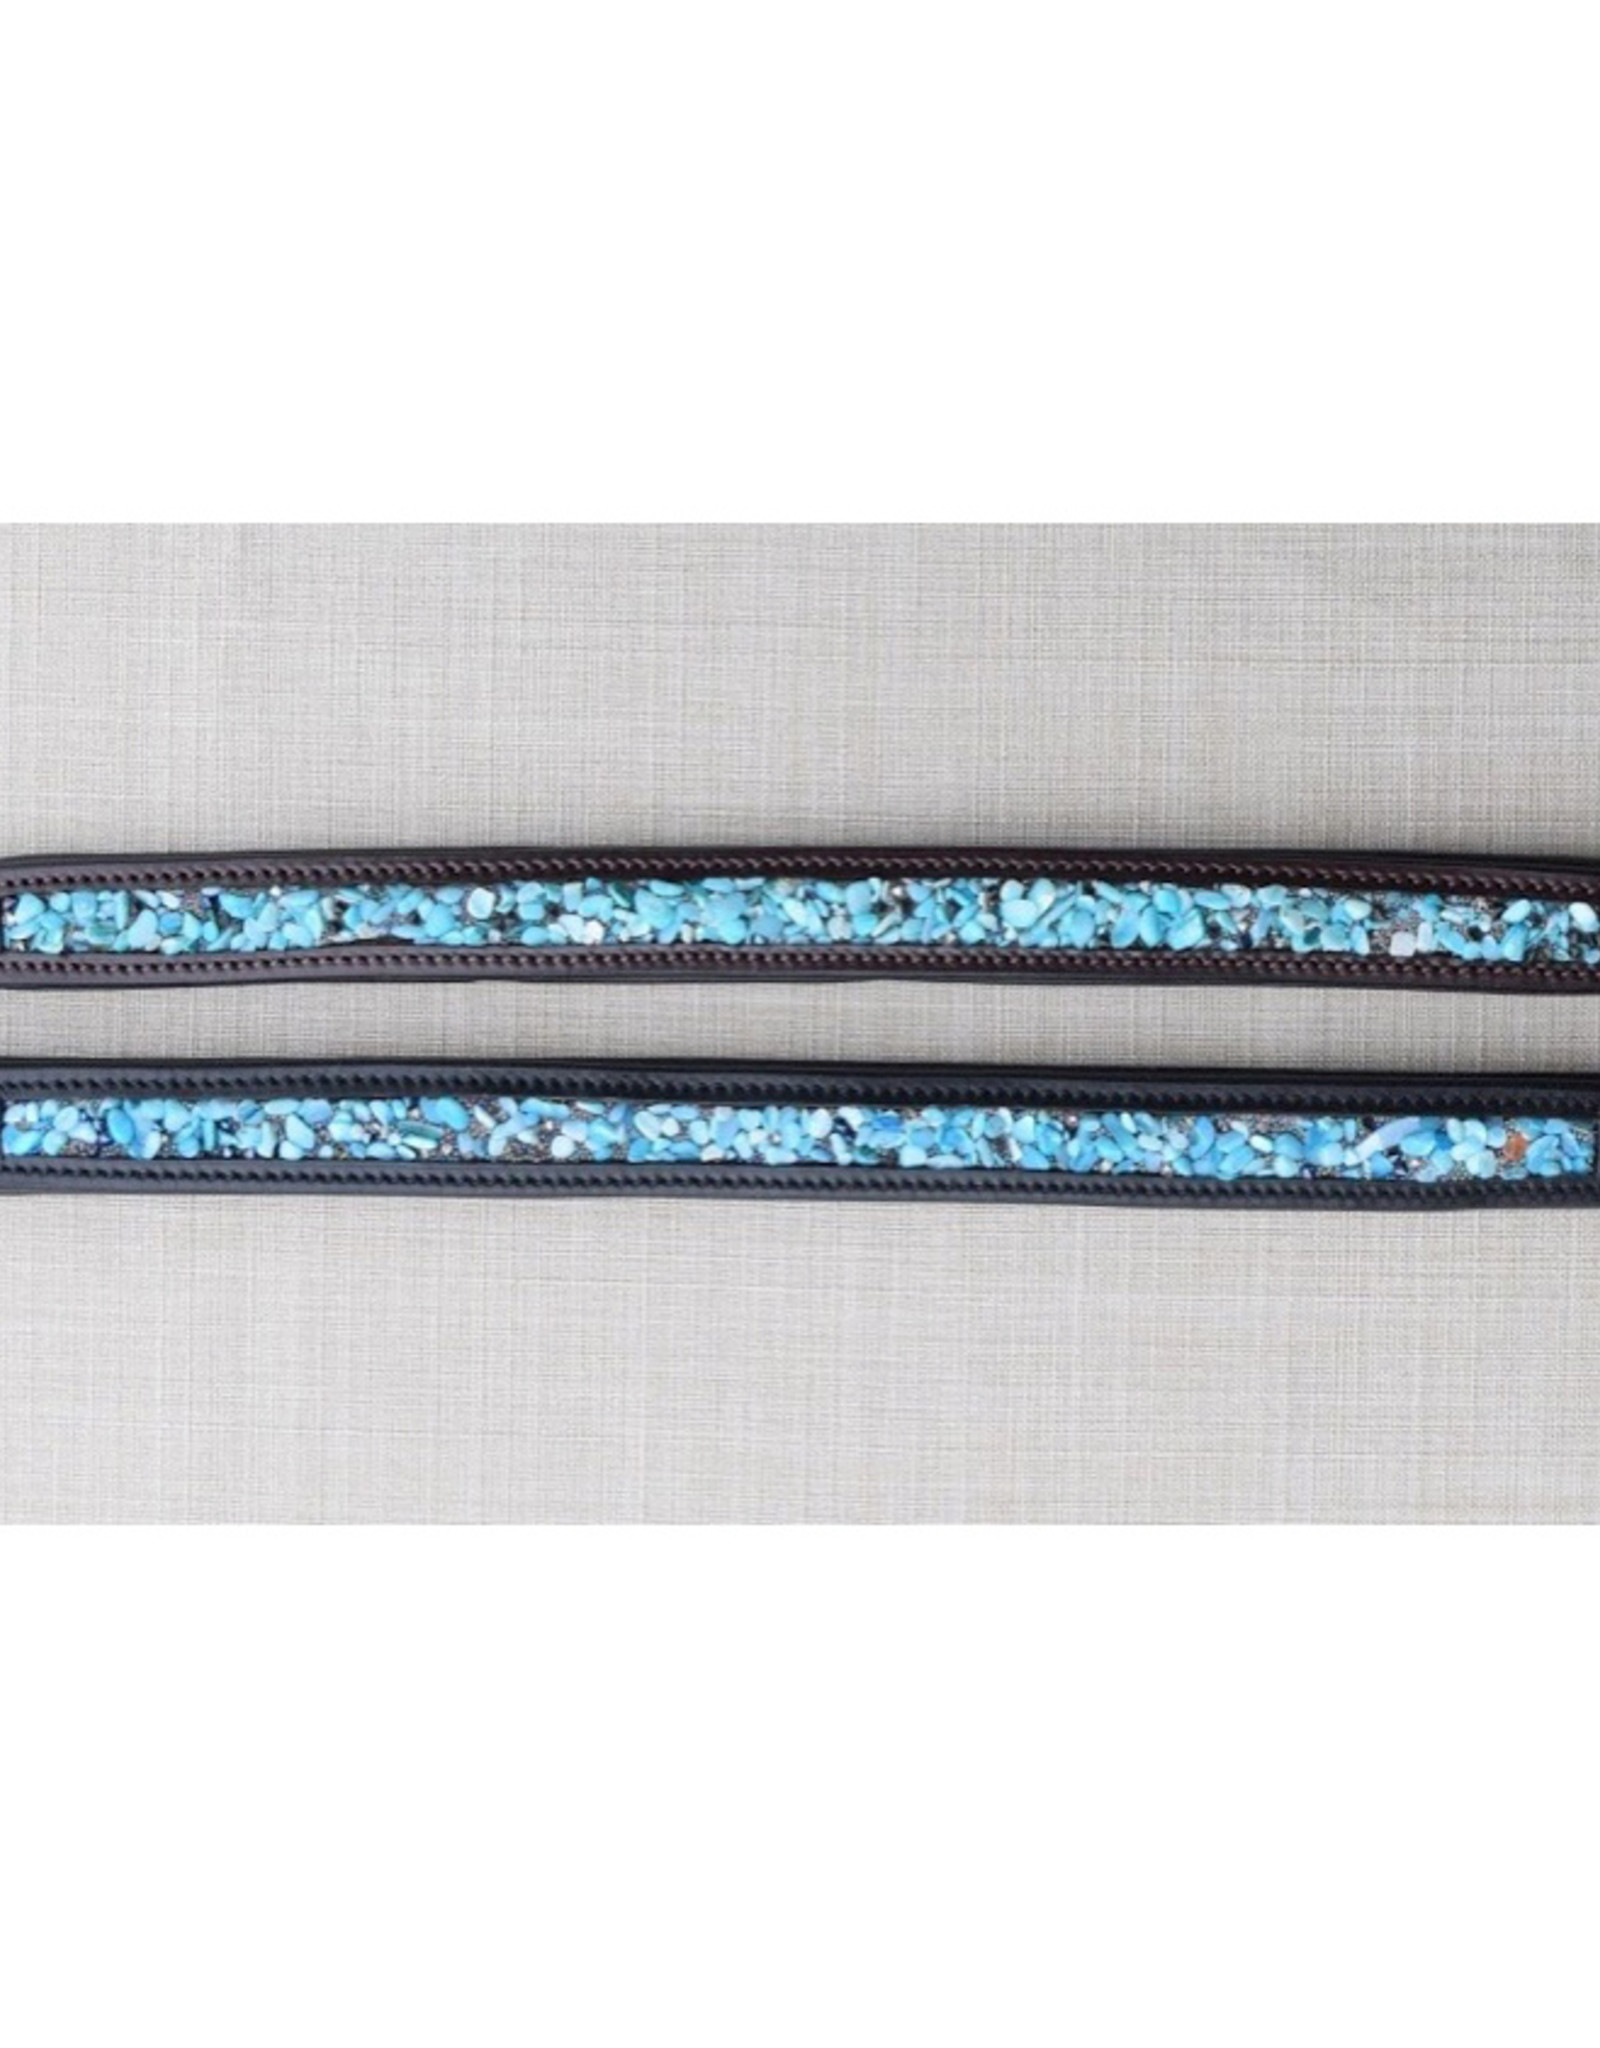 Red Barn Turquoise Stone Padded Browband